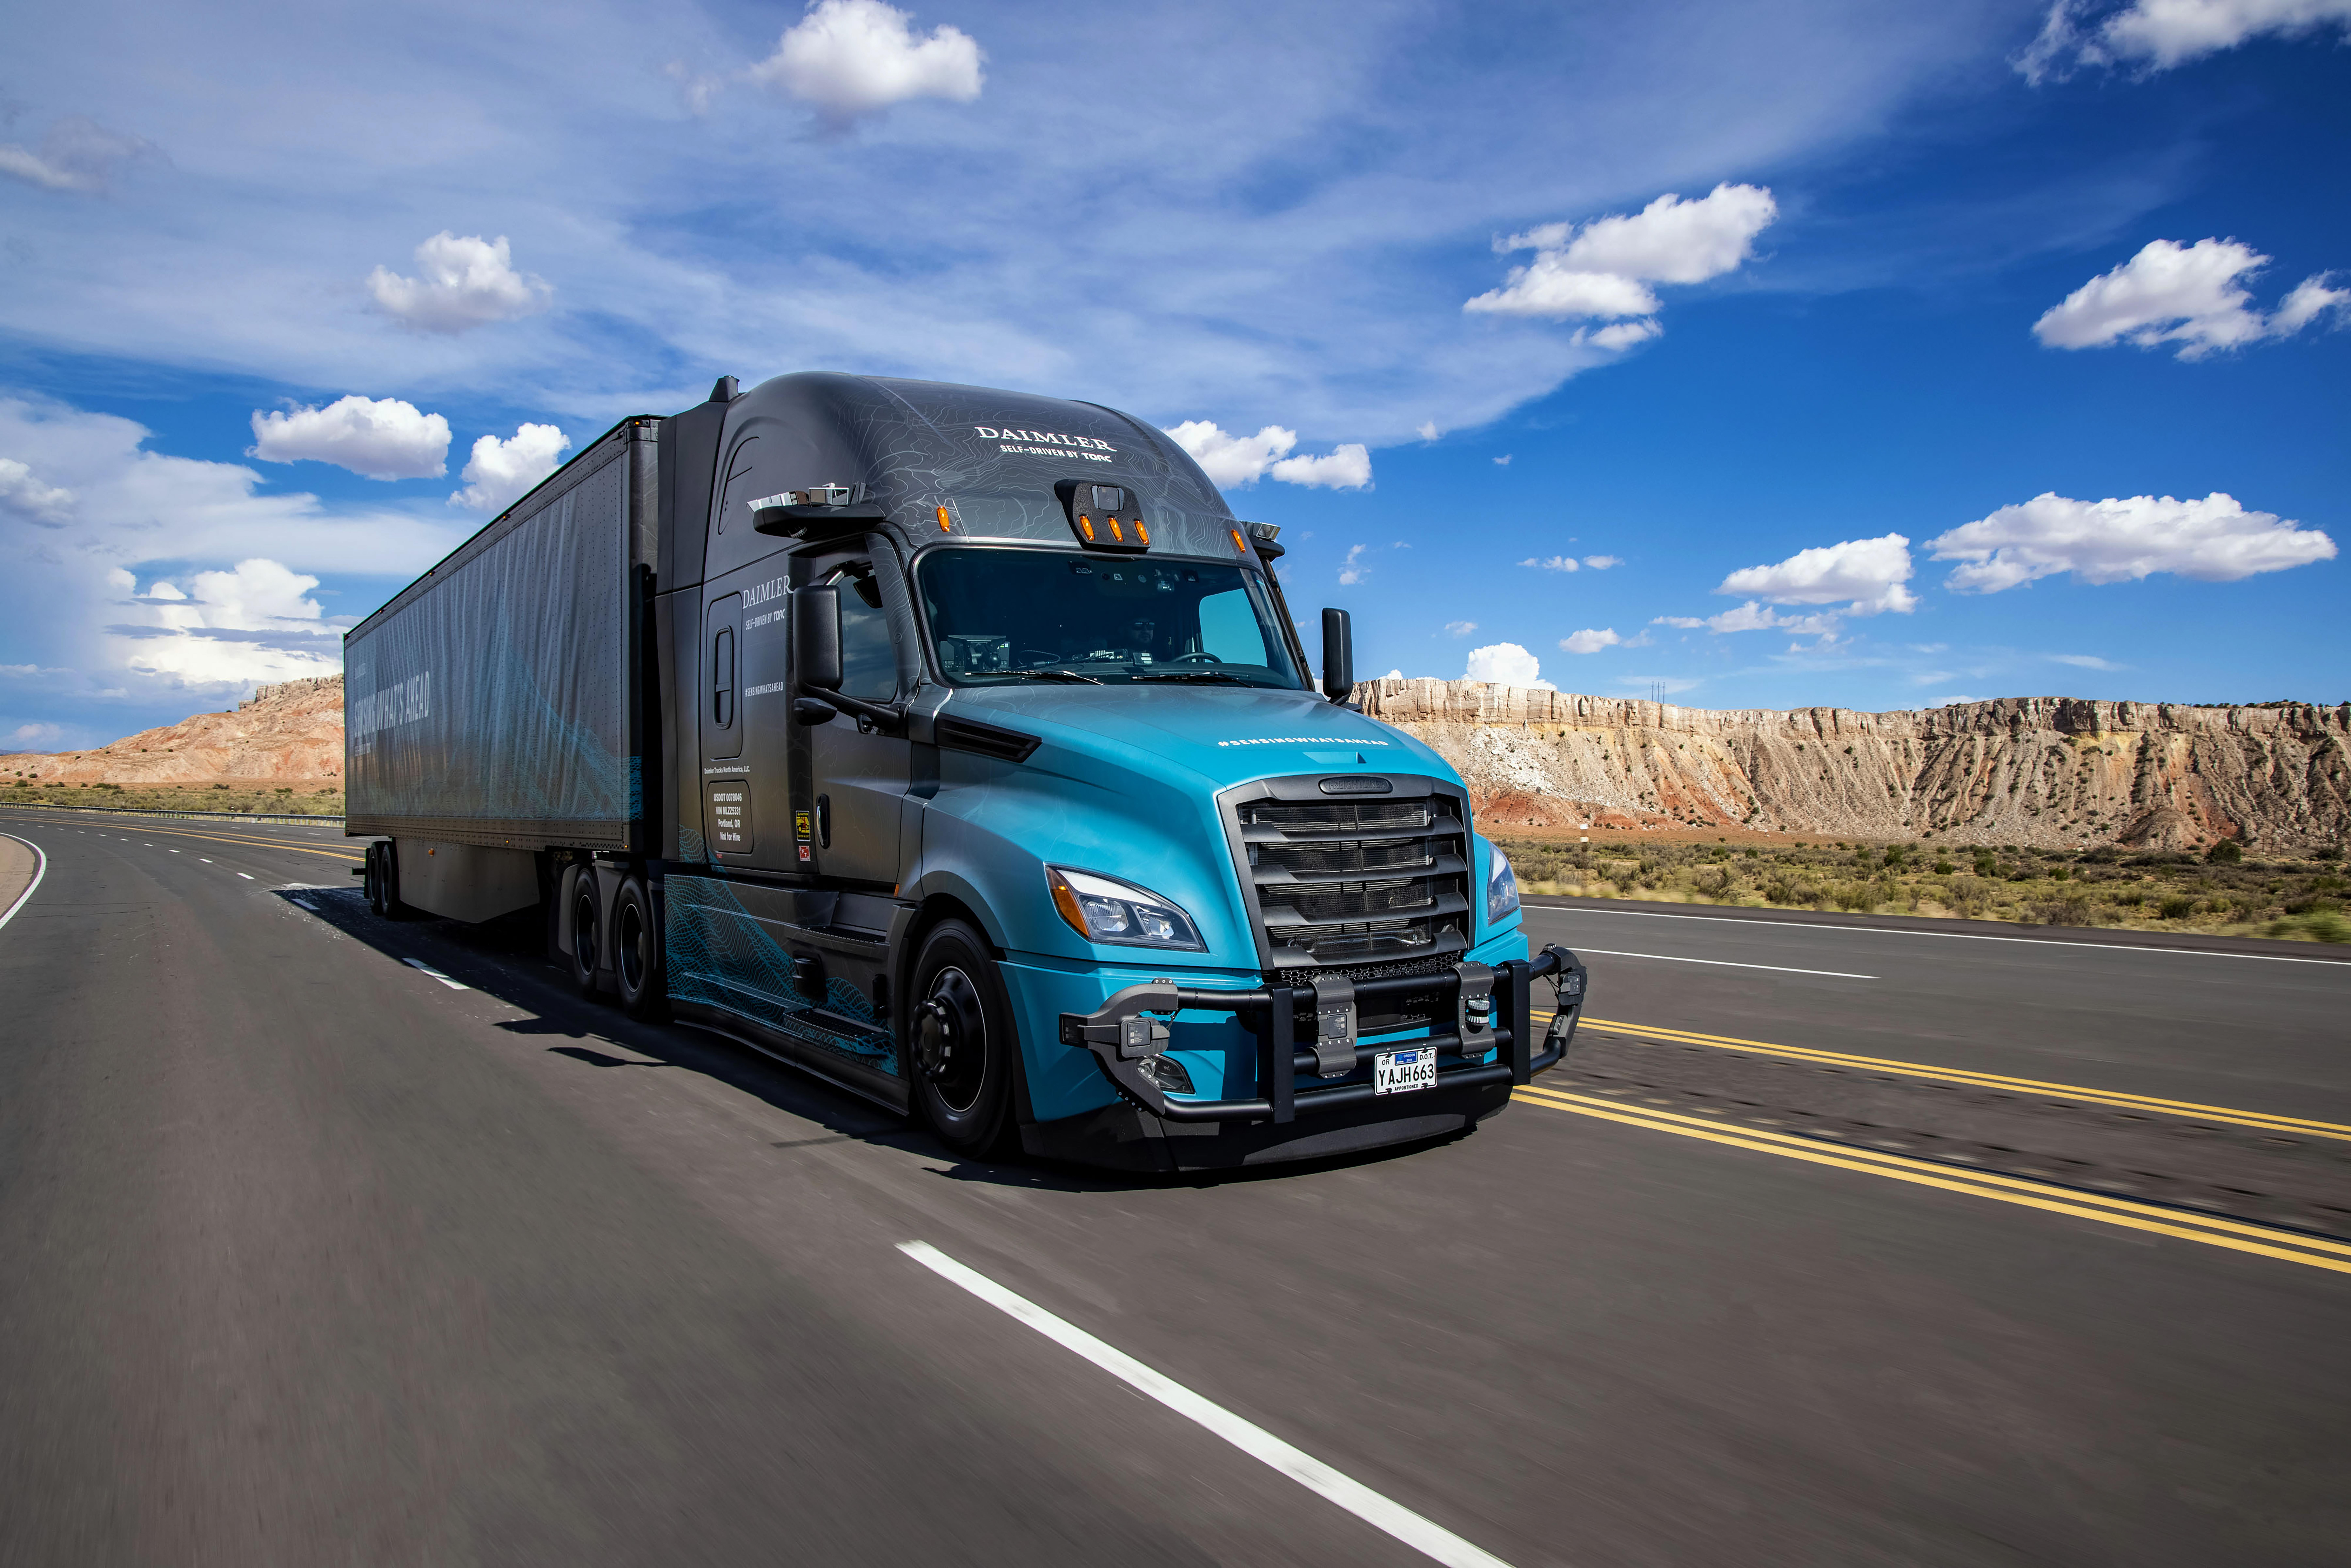 Torc self-driving freight truck driving on highway near mesa